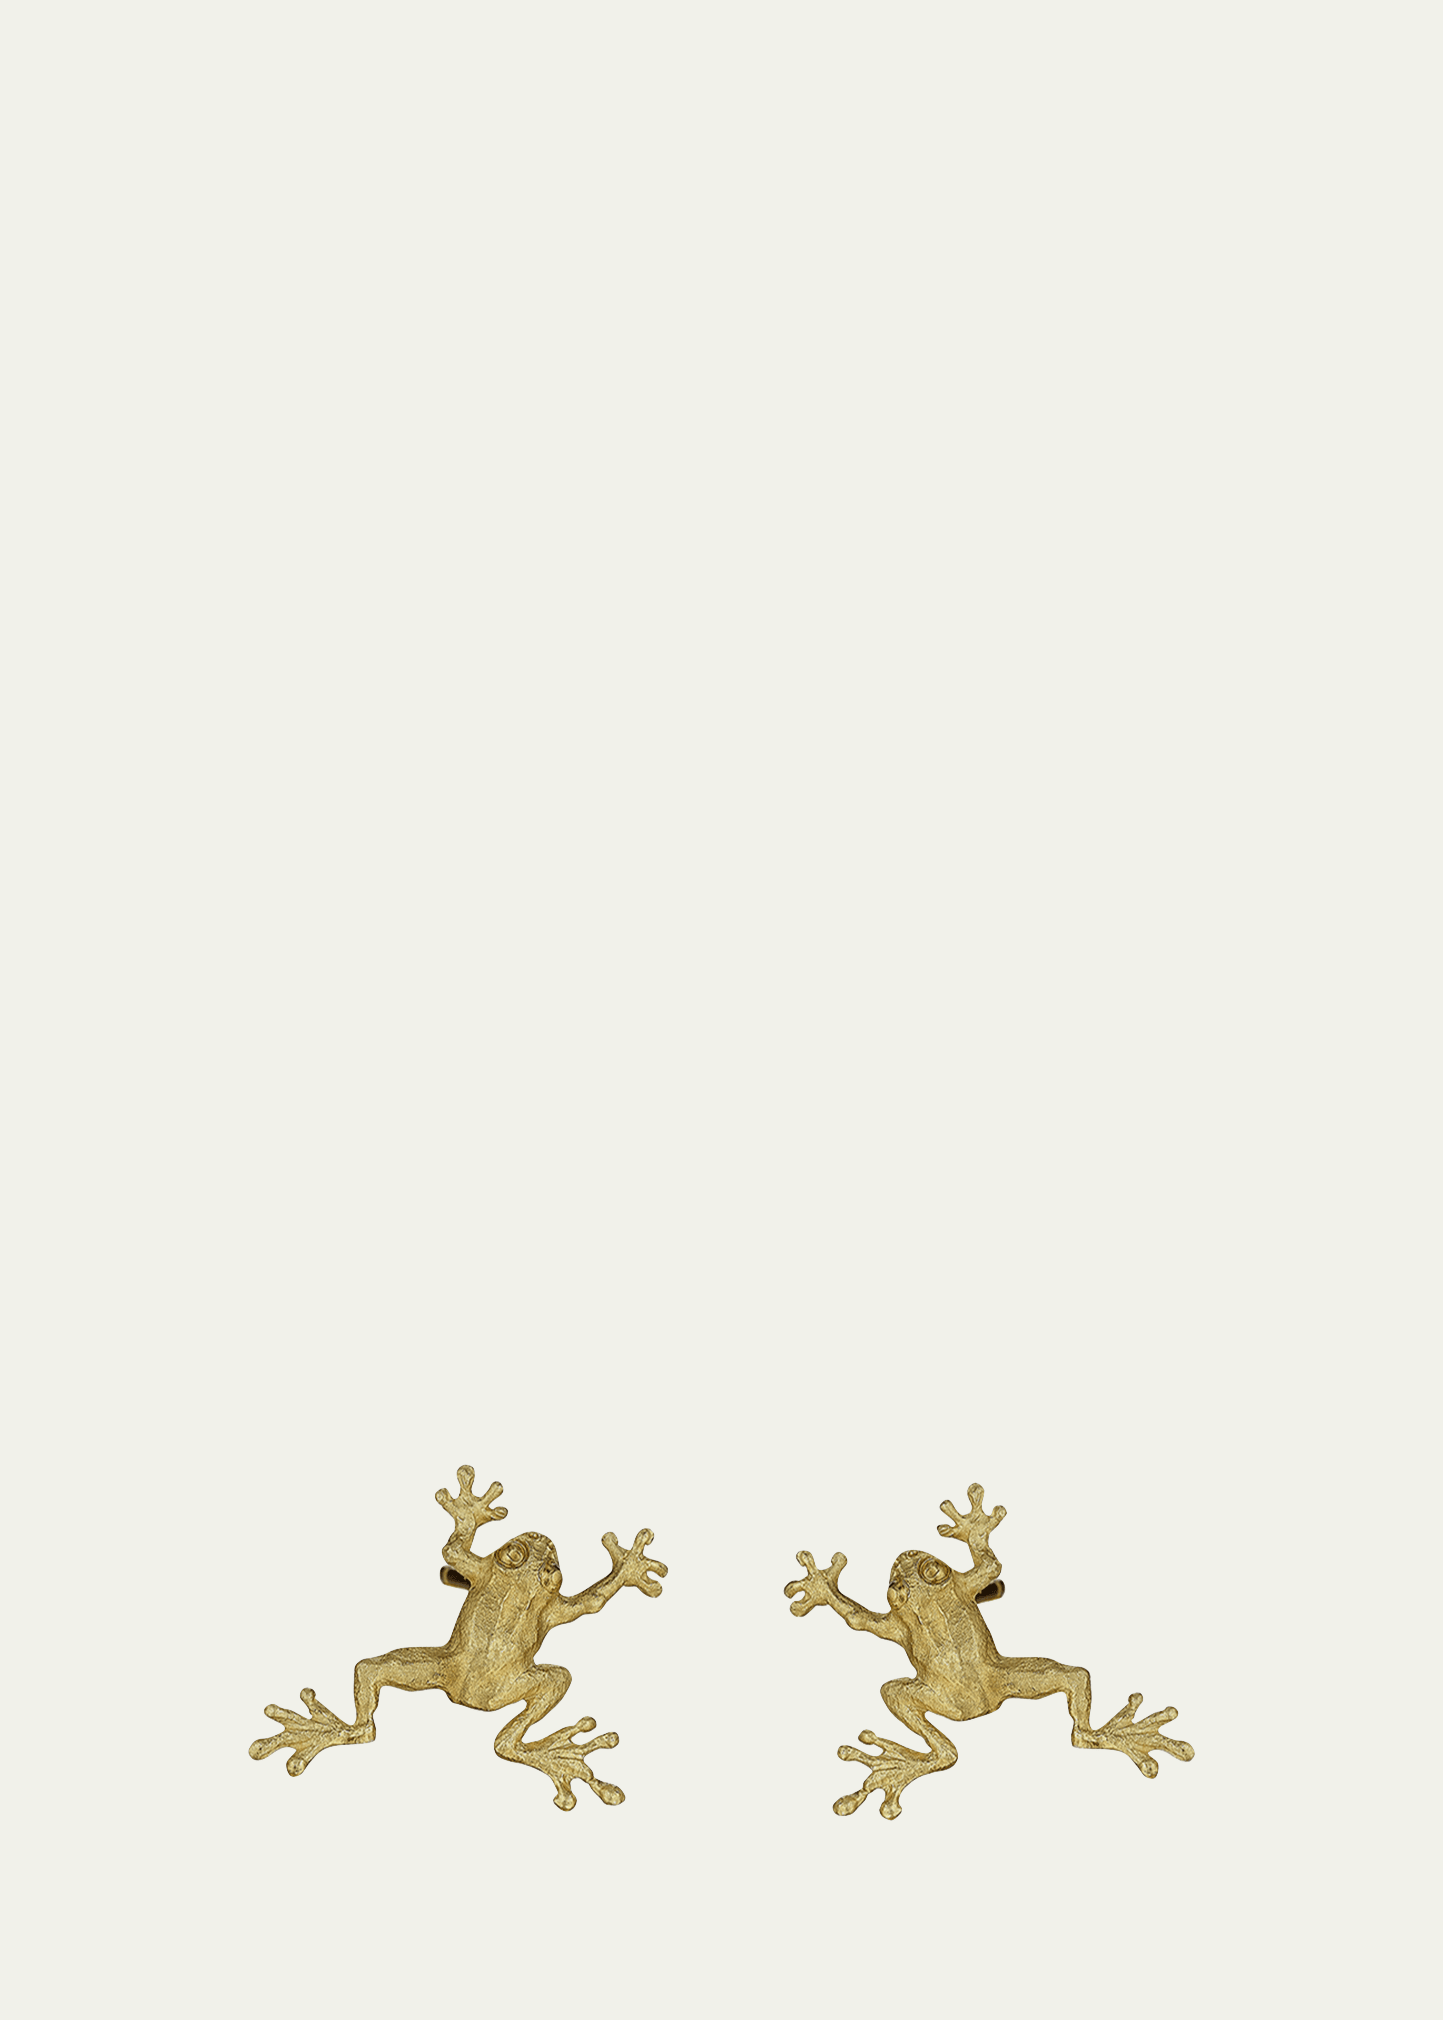 Anthony Lent Climbing Tree Frog Stud Earrings in 18k Yellow Gold and Diamonds